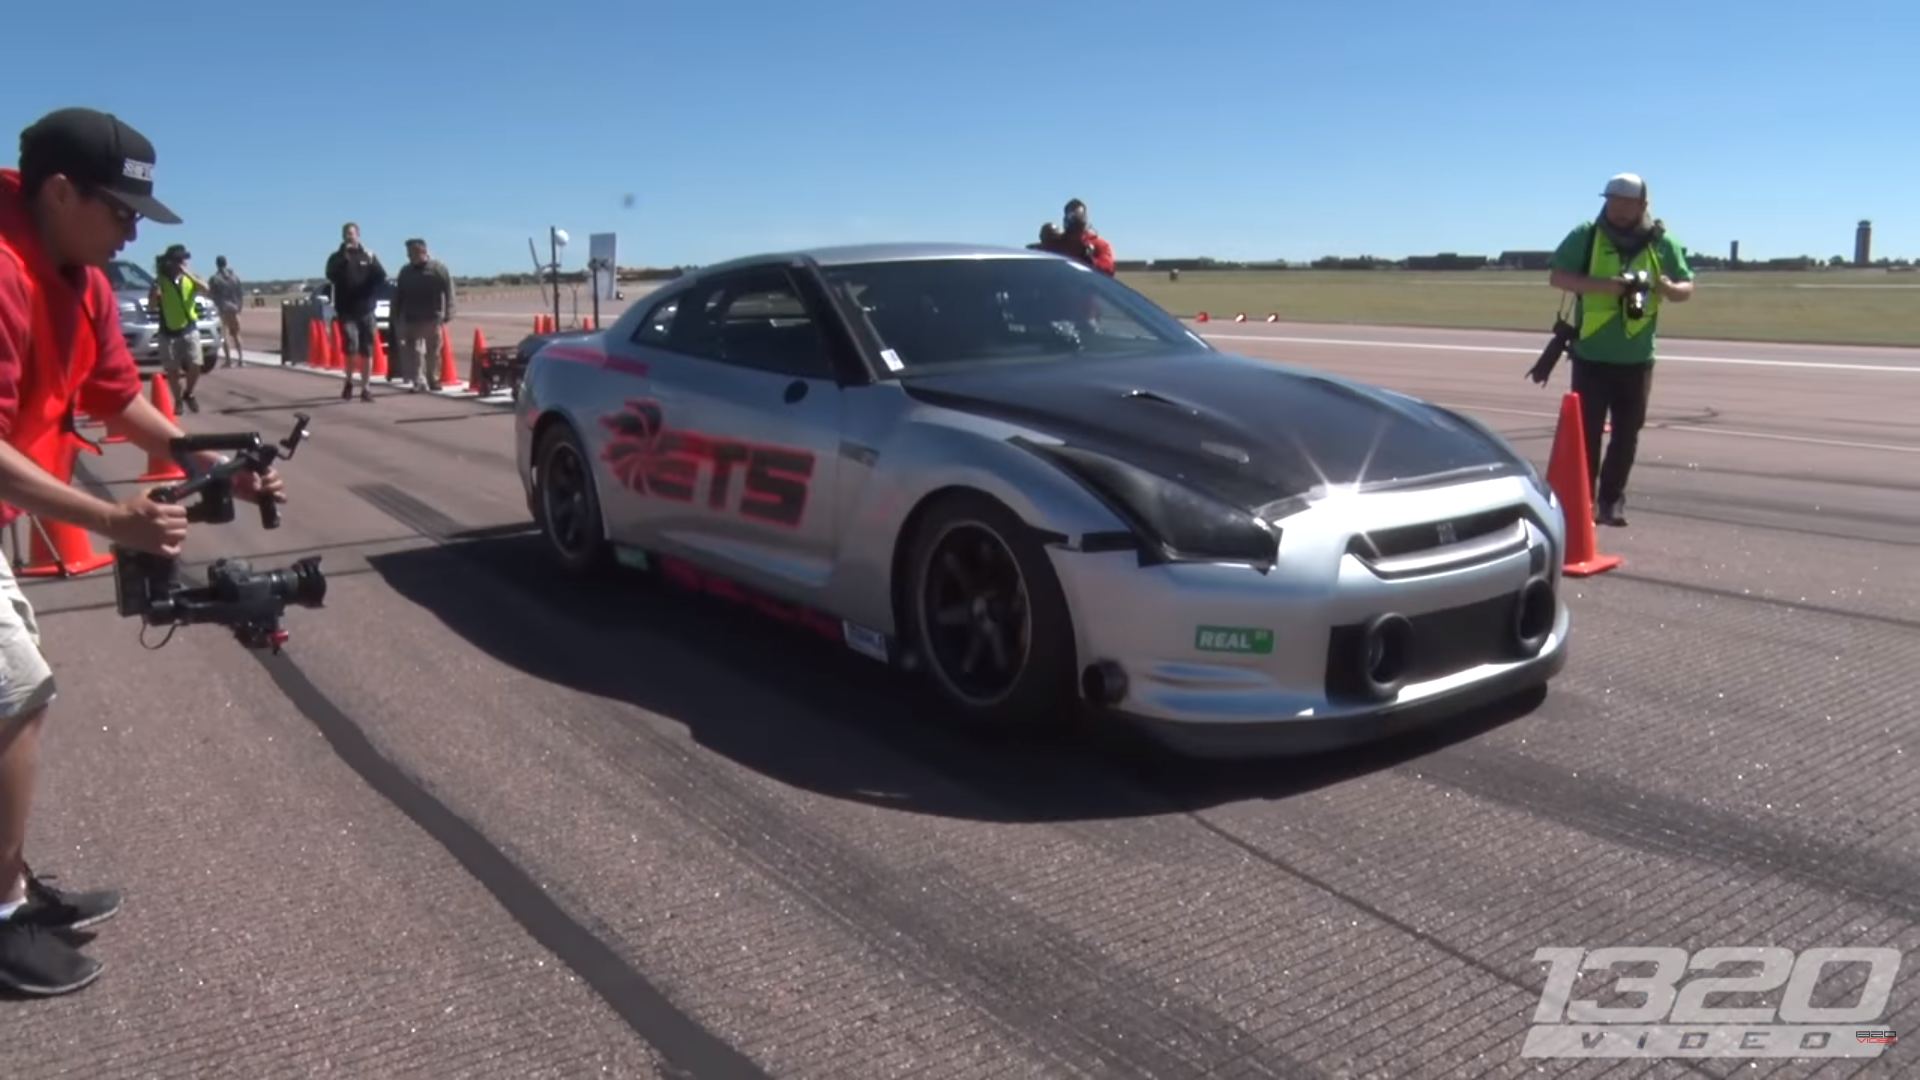 Watch the World’s Fastest Nissan GT-R Destroy Half-Mile Record at 255 MPH